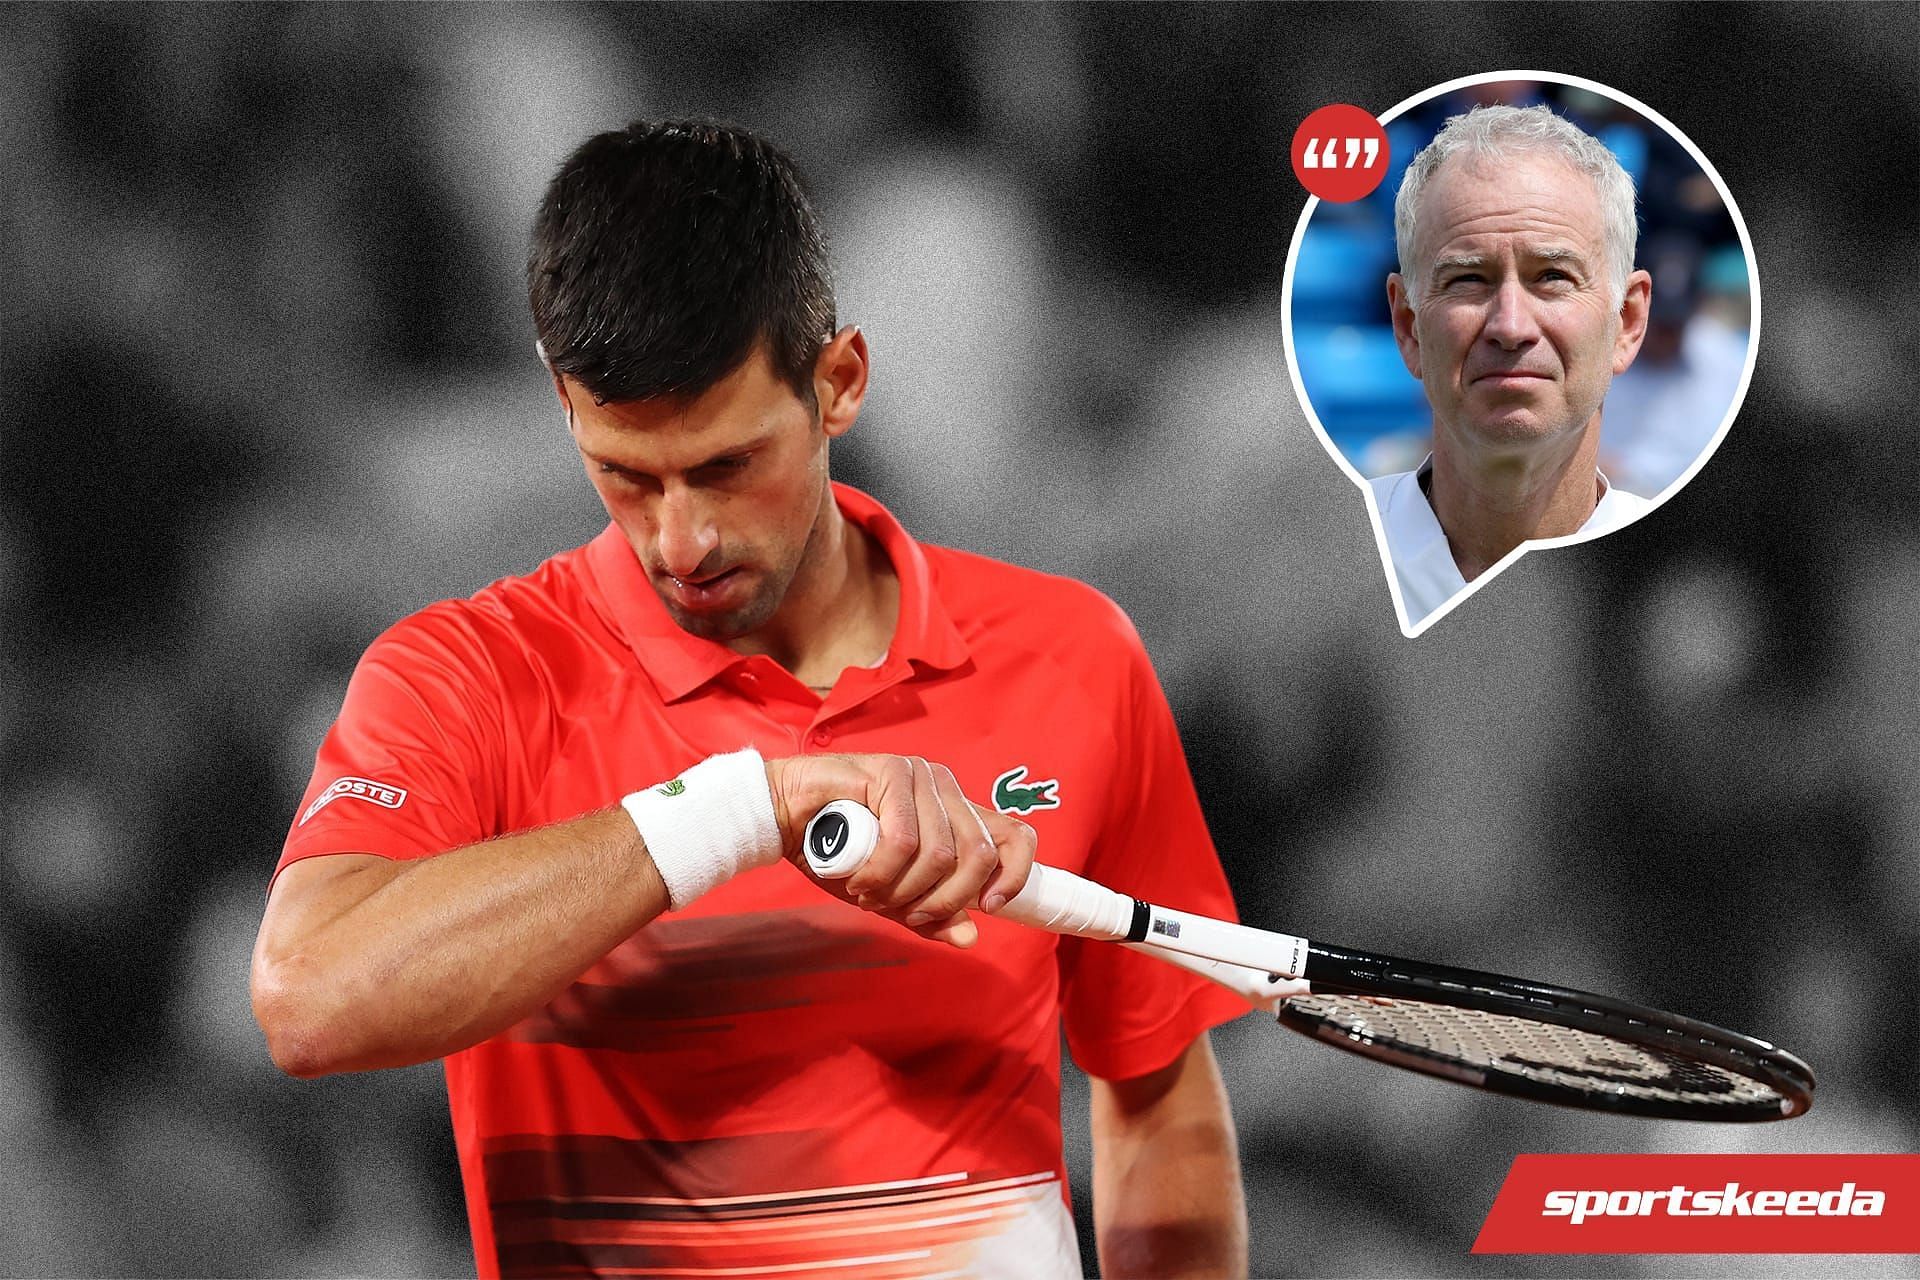 John McEnroe [inset] spoke out against the partisan crowd support received by Novak Djokovic at Roland Garros.